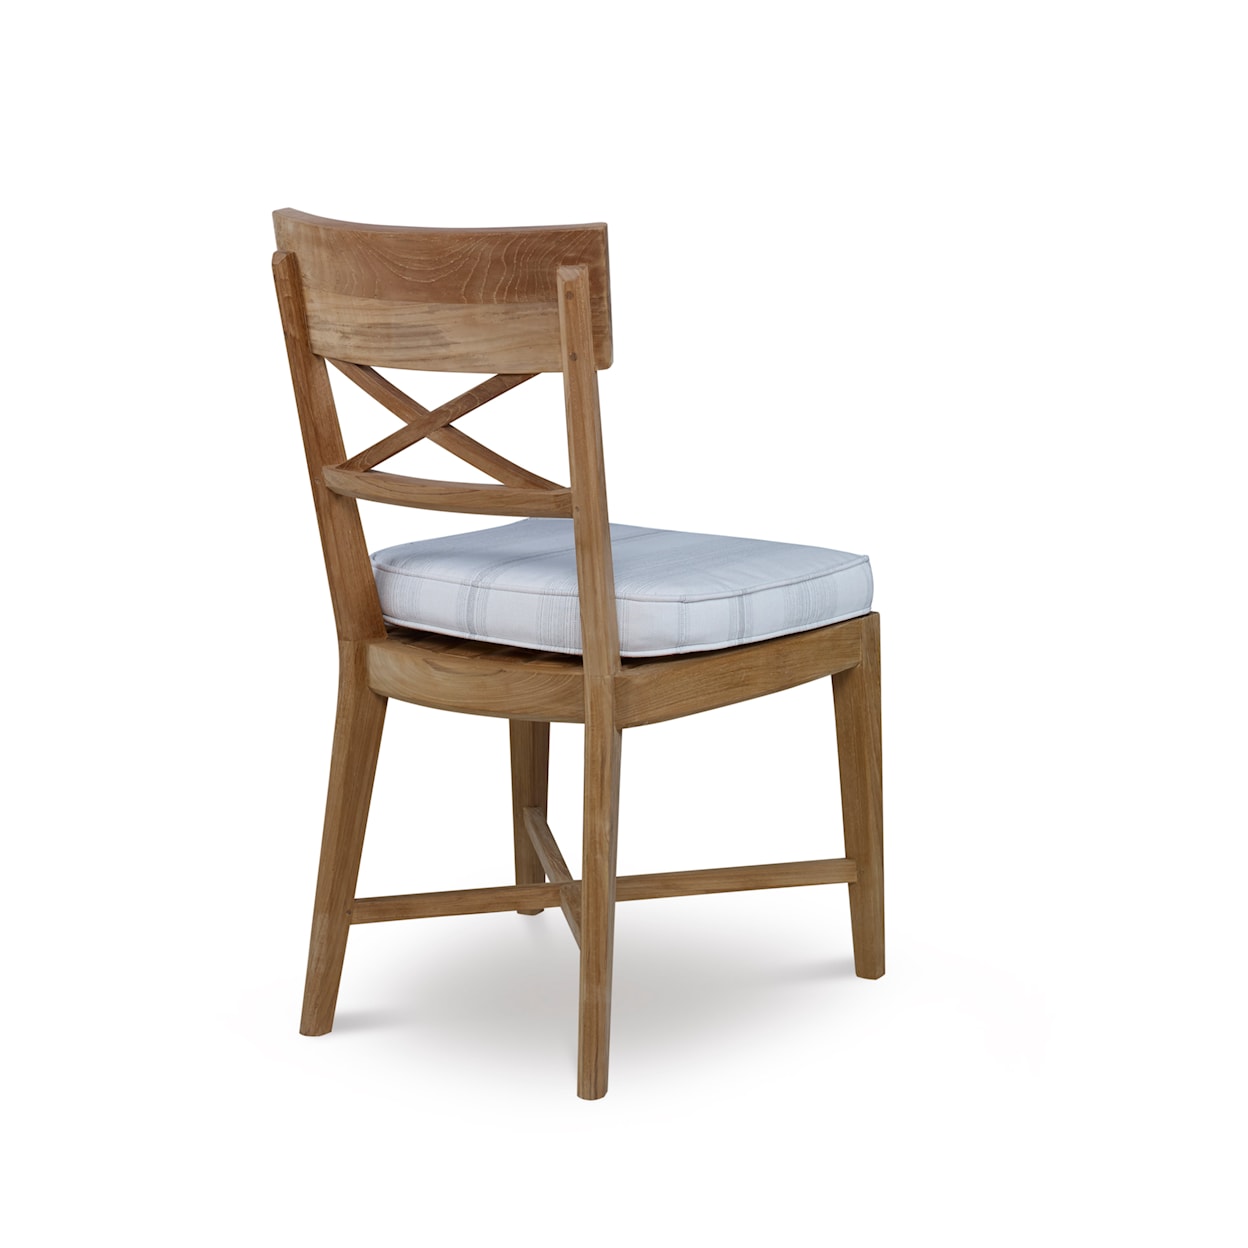 Century West Bay Outdoor Side Chair with Cushion